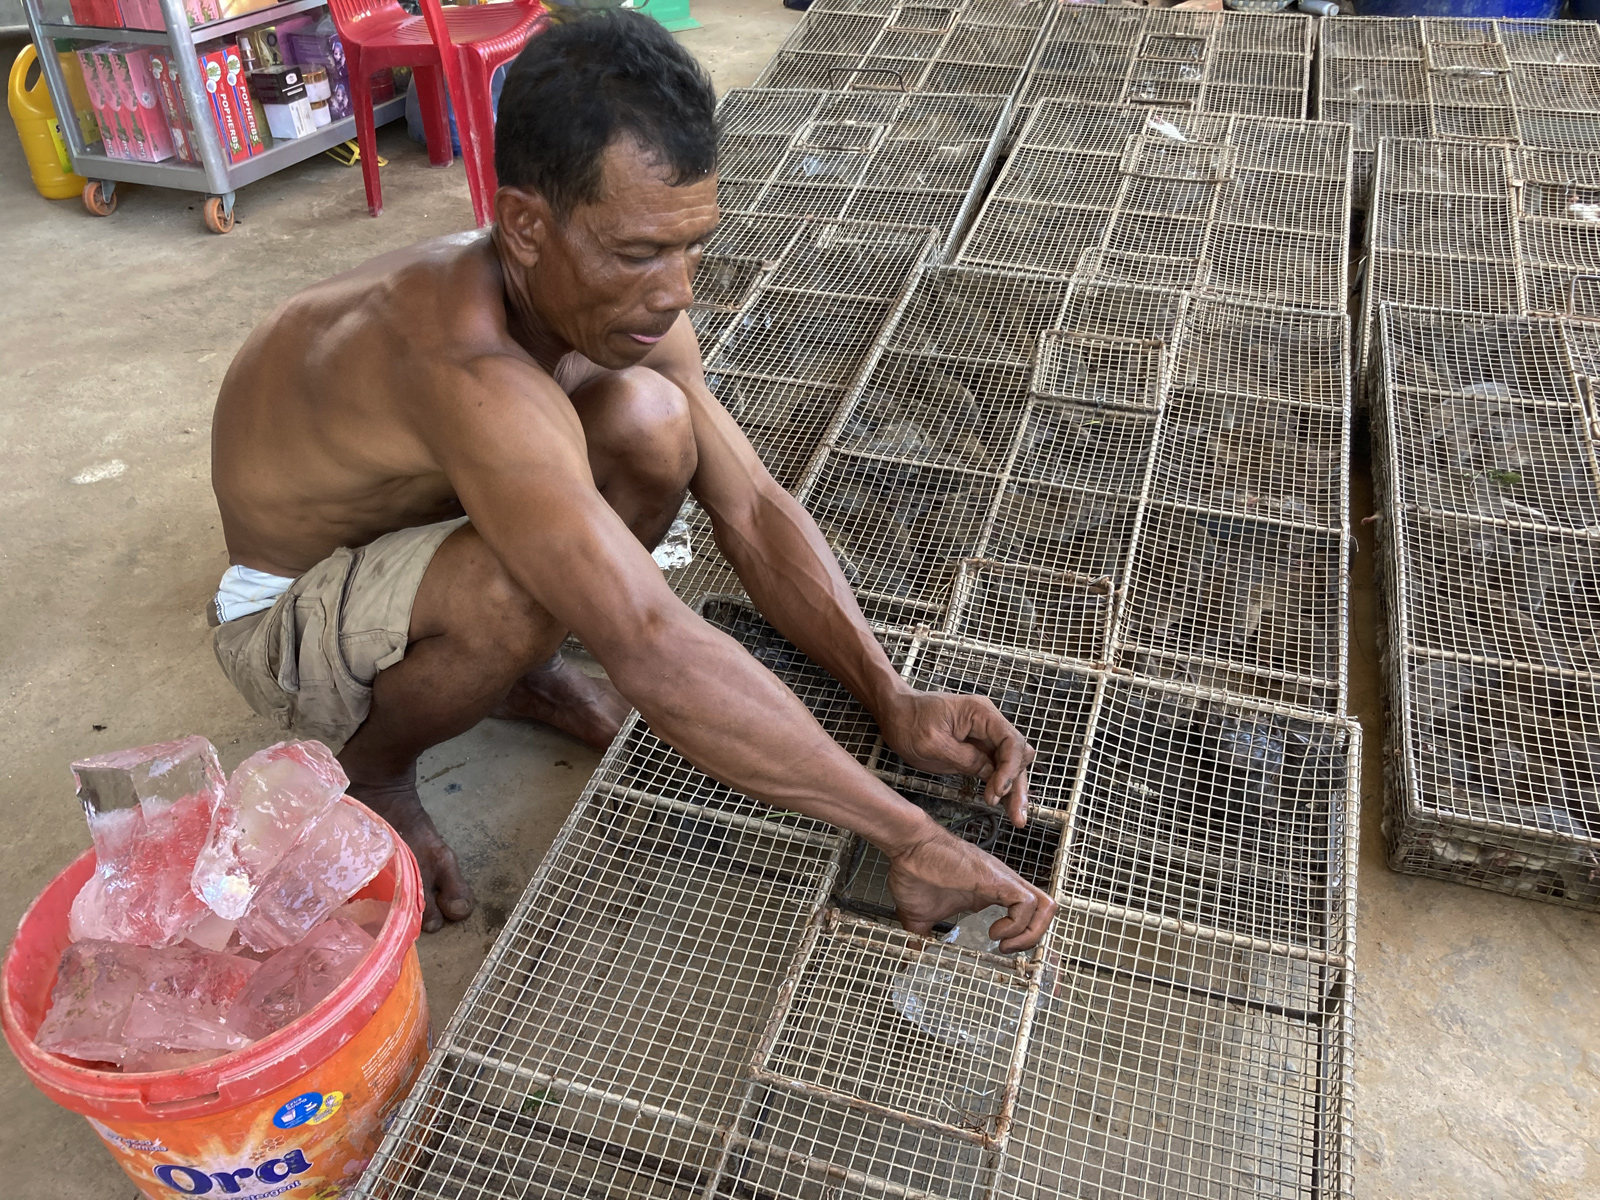 Rat broker Lor Sam Ath places pieces of ice in the cages to allow the rodents to hydrate as they make their way across the border to Vietnam.